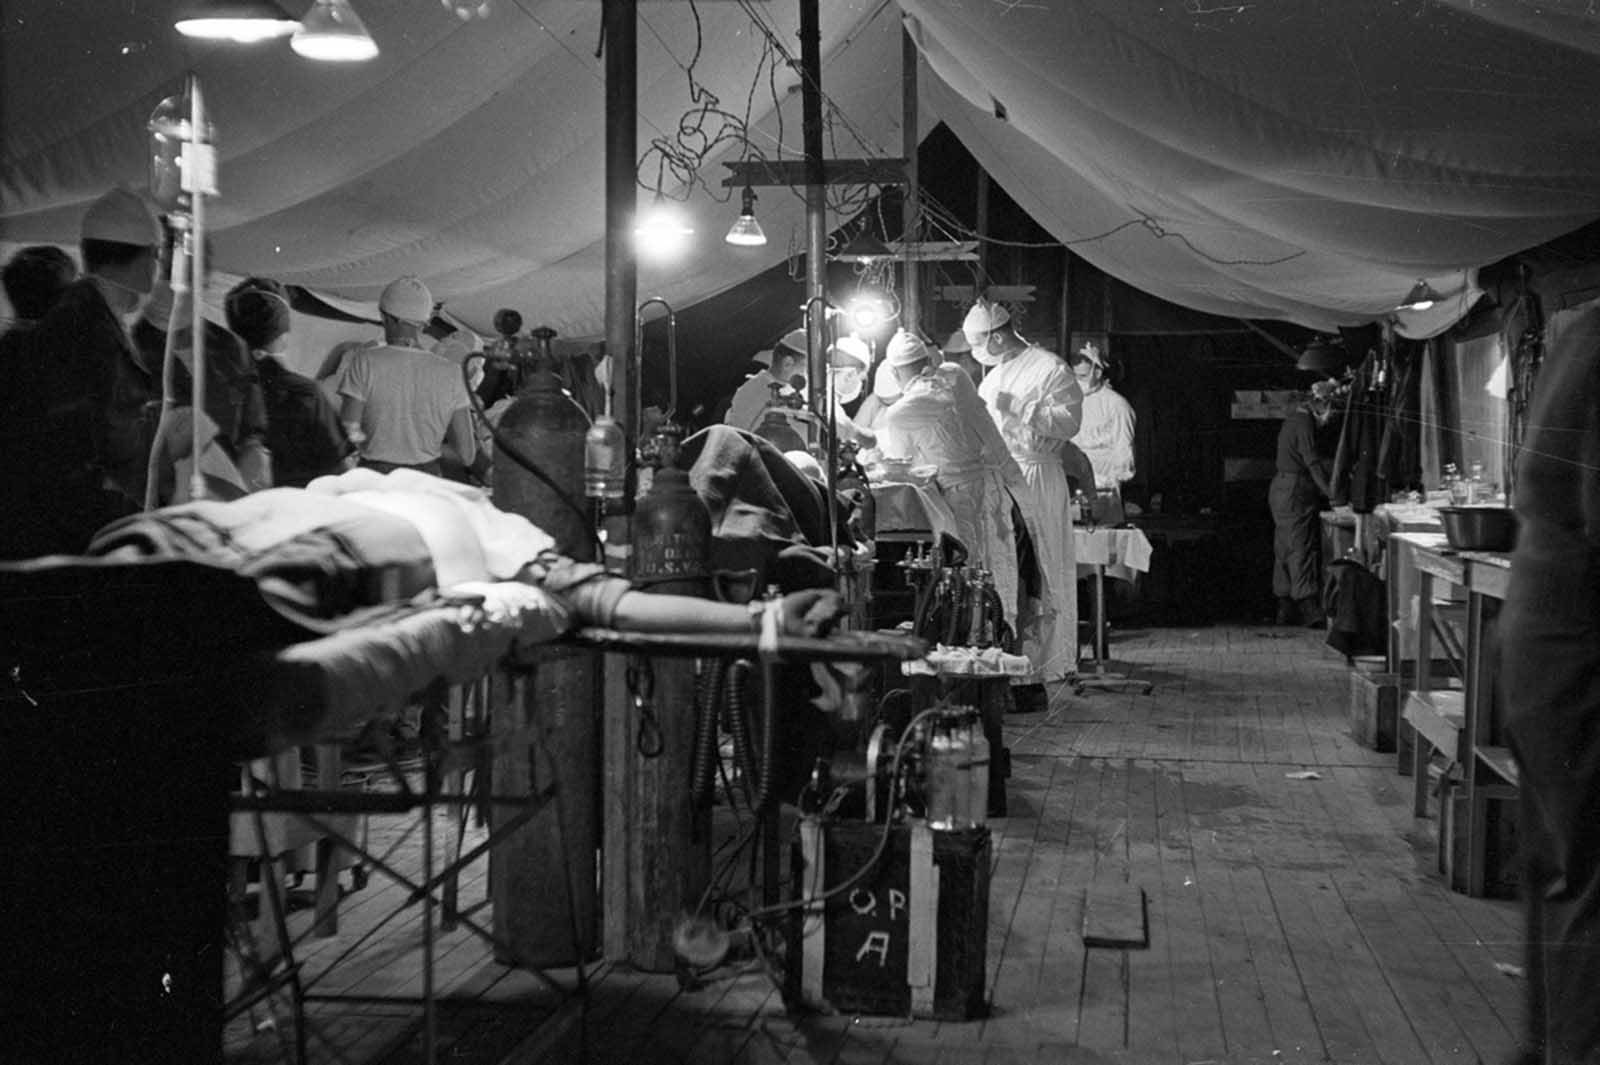 A mobile army surgical hospital somewhere in Korea on October 26, 1951. The patient in the left foreground is receiving blood plasma, while behind him two operations are taking place, one at left and one in the center. Photographer Healy took the photos as he found them. Everyone was so busy that no one had time to pose.